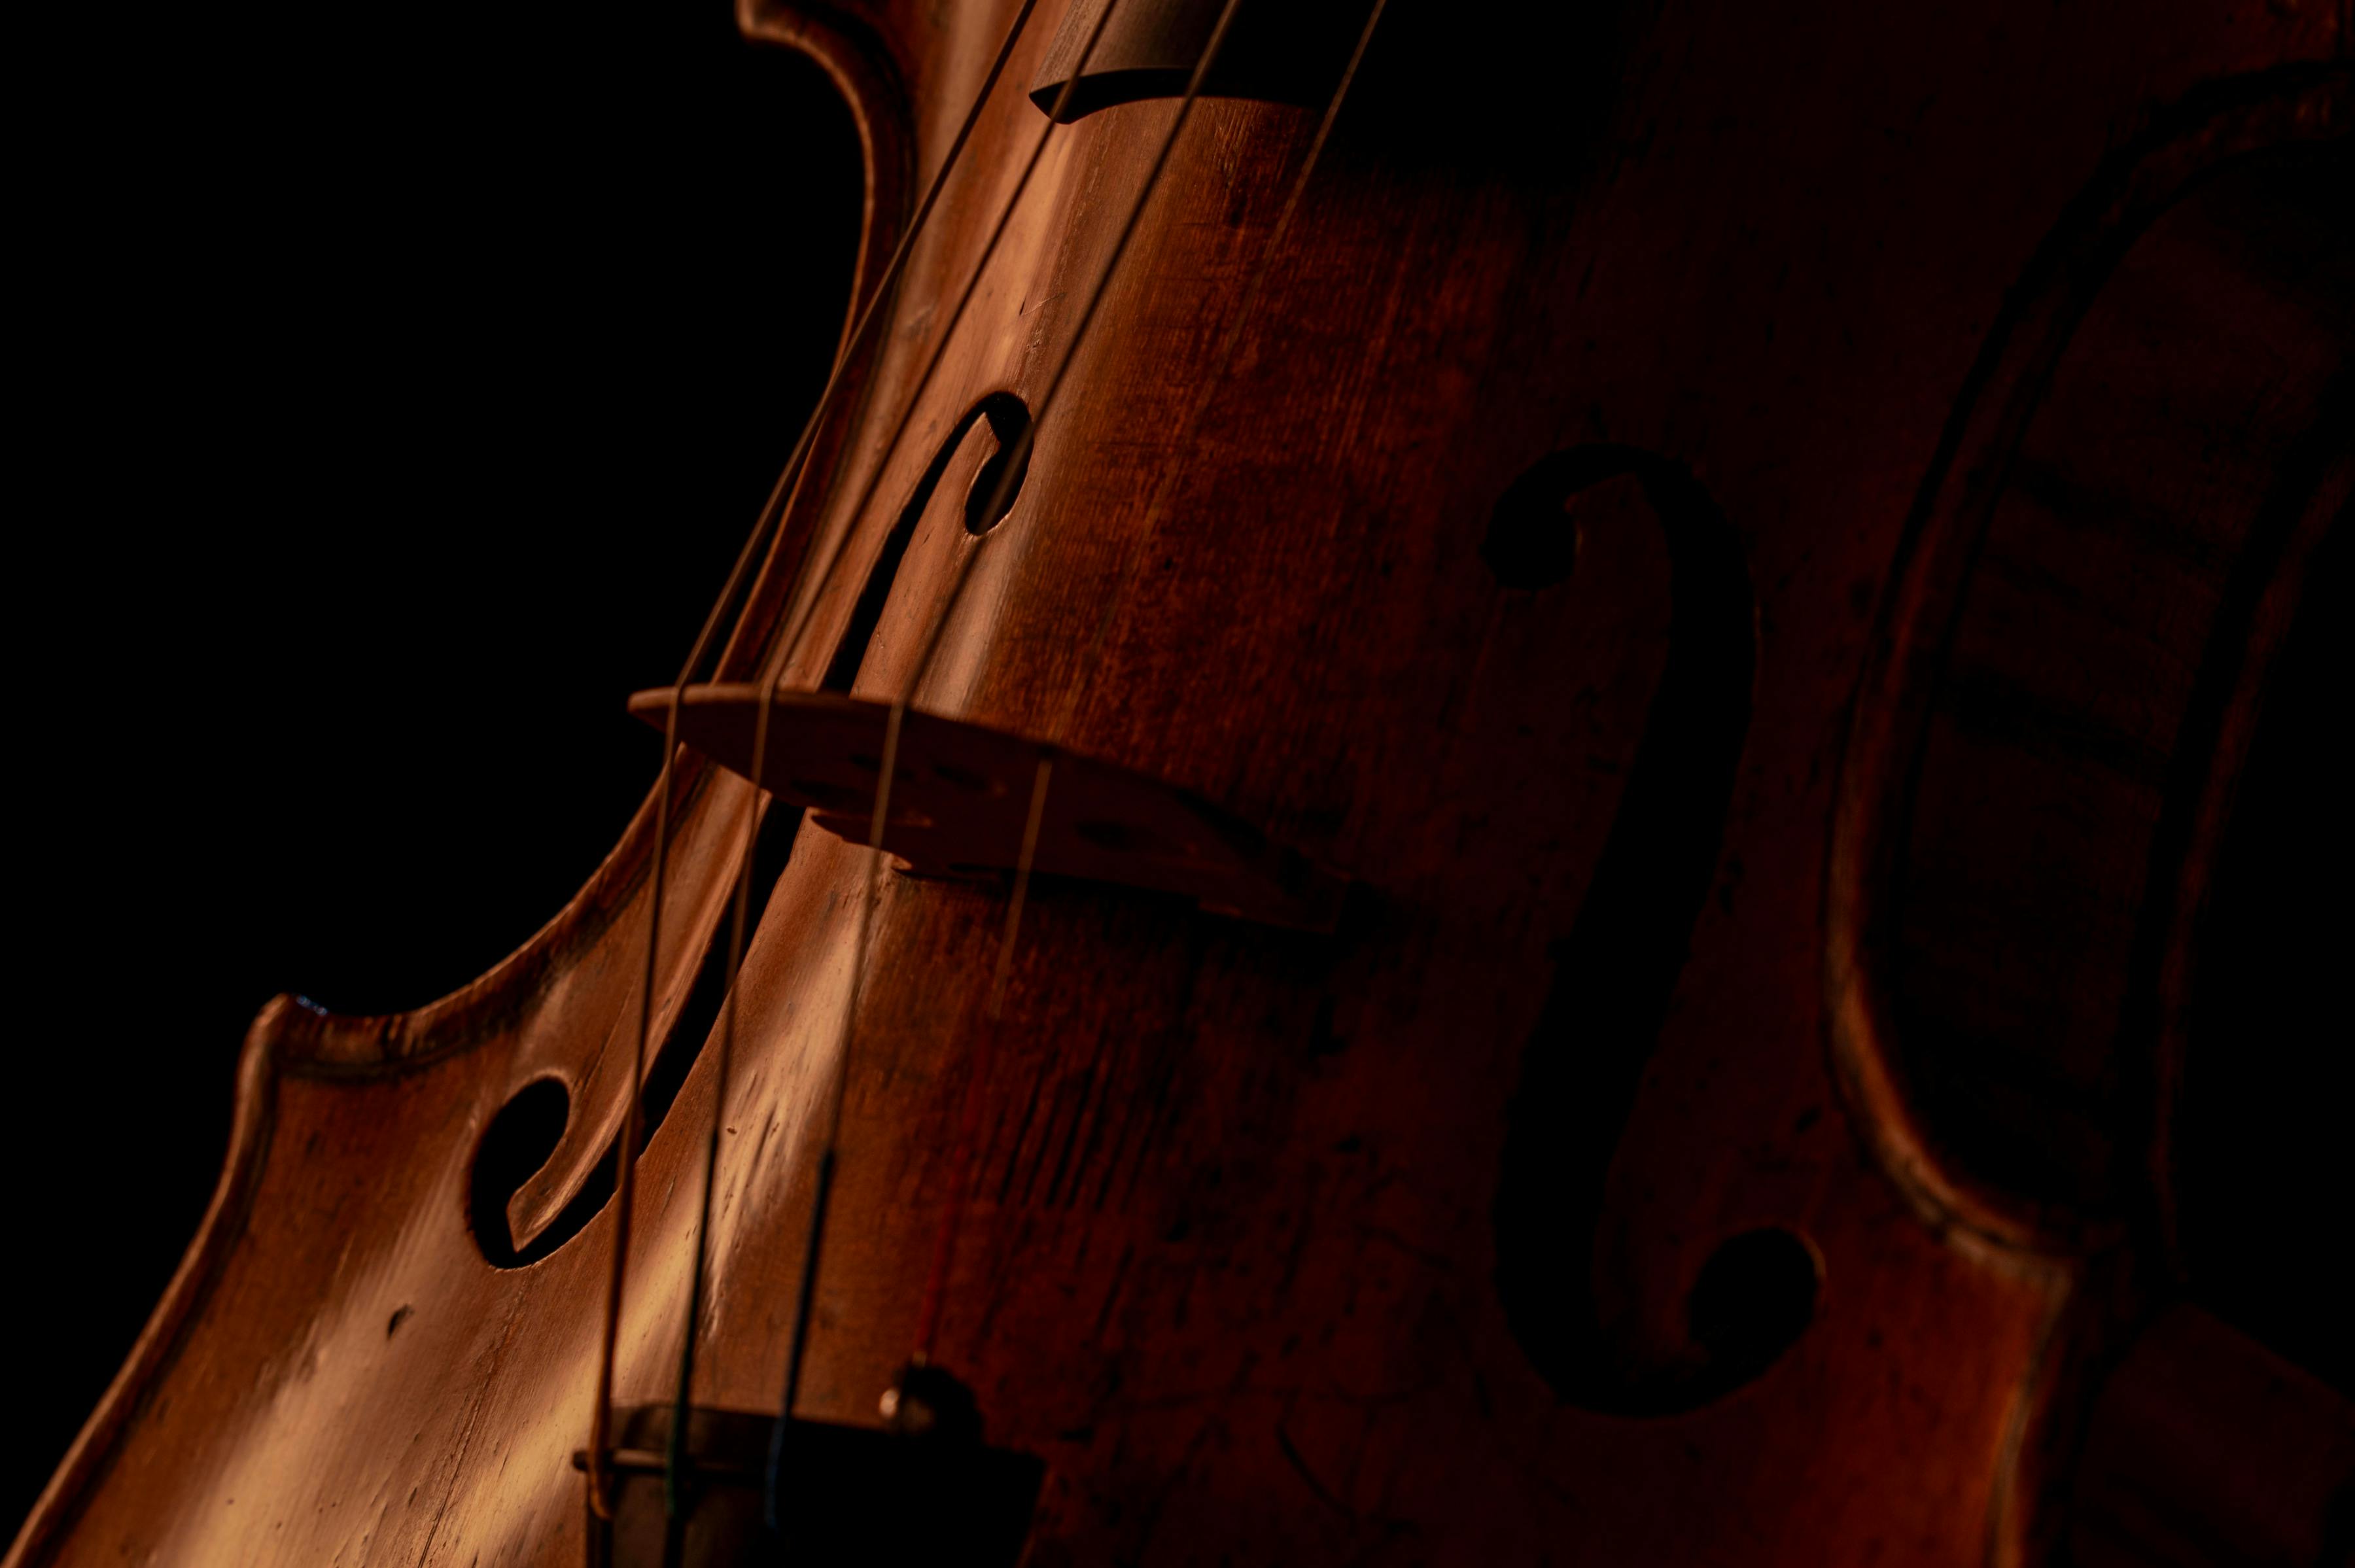 Up close of violin strings and bridge over black background